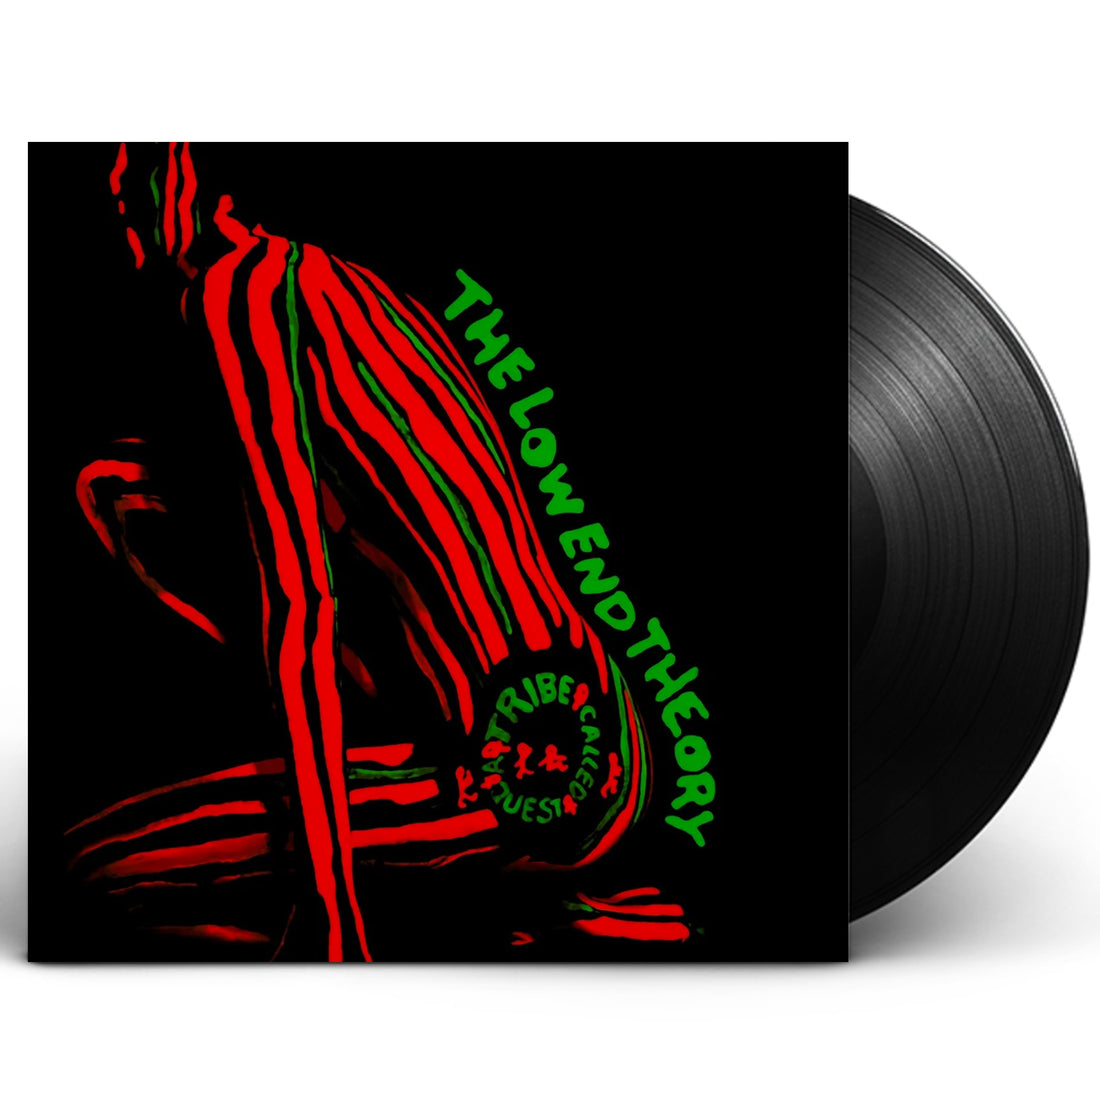 A TRIBE CALLED QUEST "THE LOW END THEORY" 2XLP VINYL